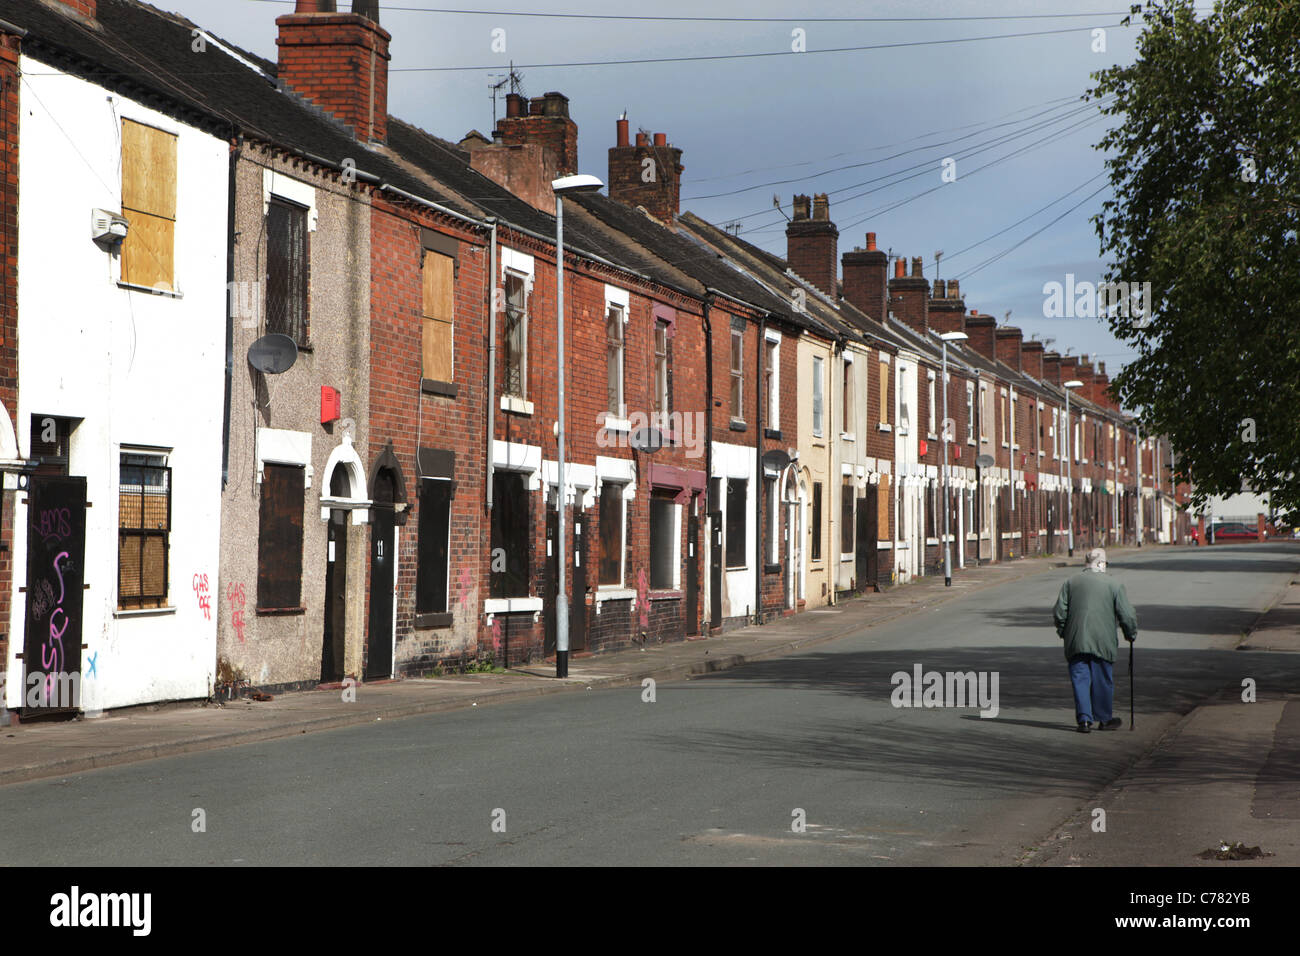 Middleport area of Stoke-on-Trent which vacated and boarded up An elderley man walks past boarded houses on Travers Street. Stock Photo